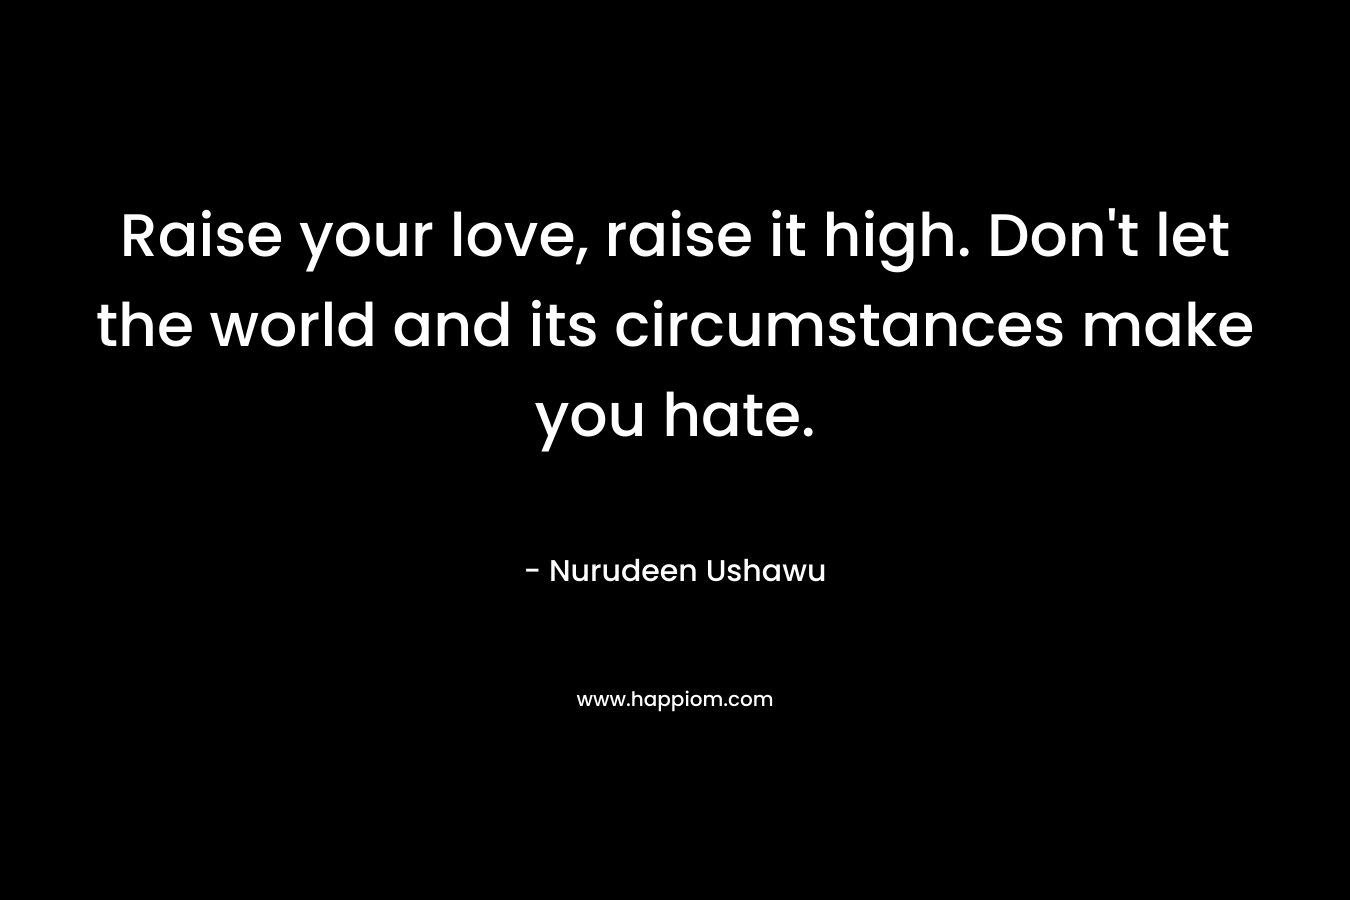 Raise your love, raise it high. Don't let the world and its circumstances make you hate.